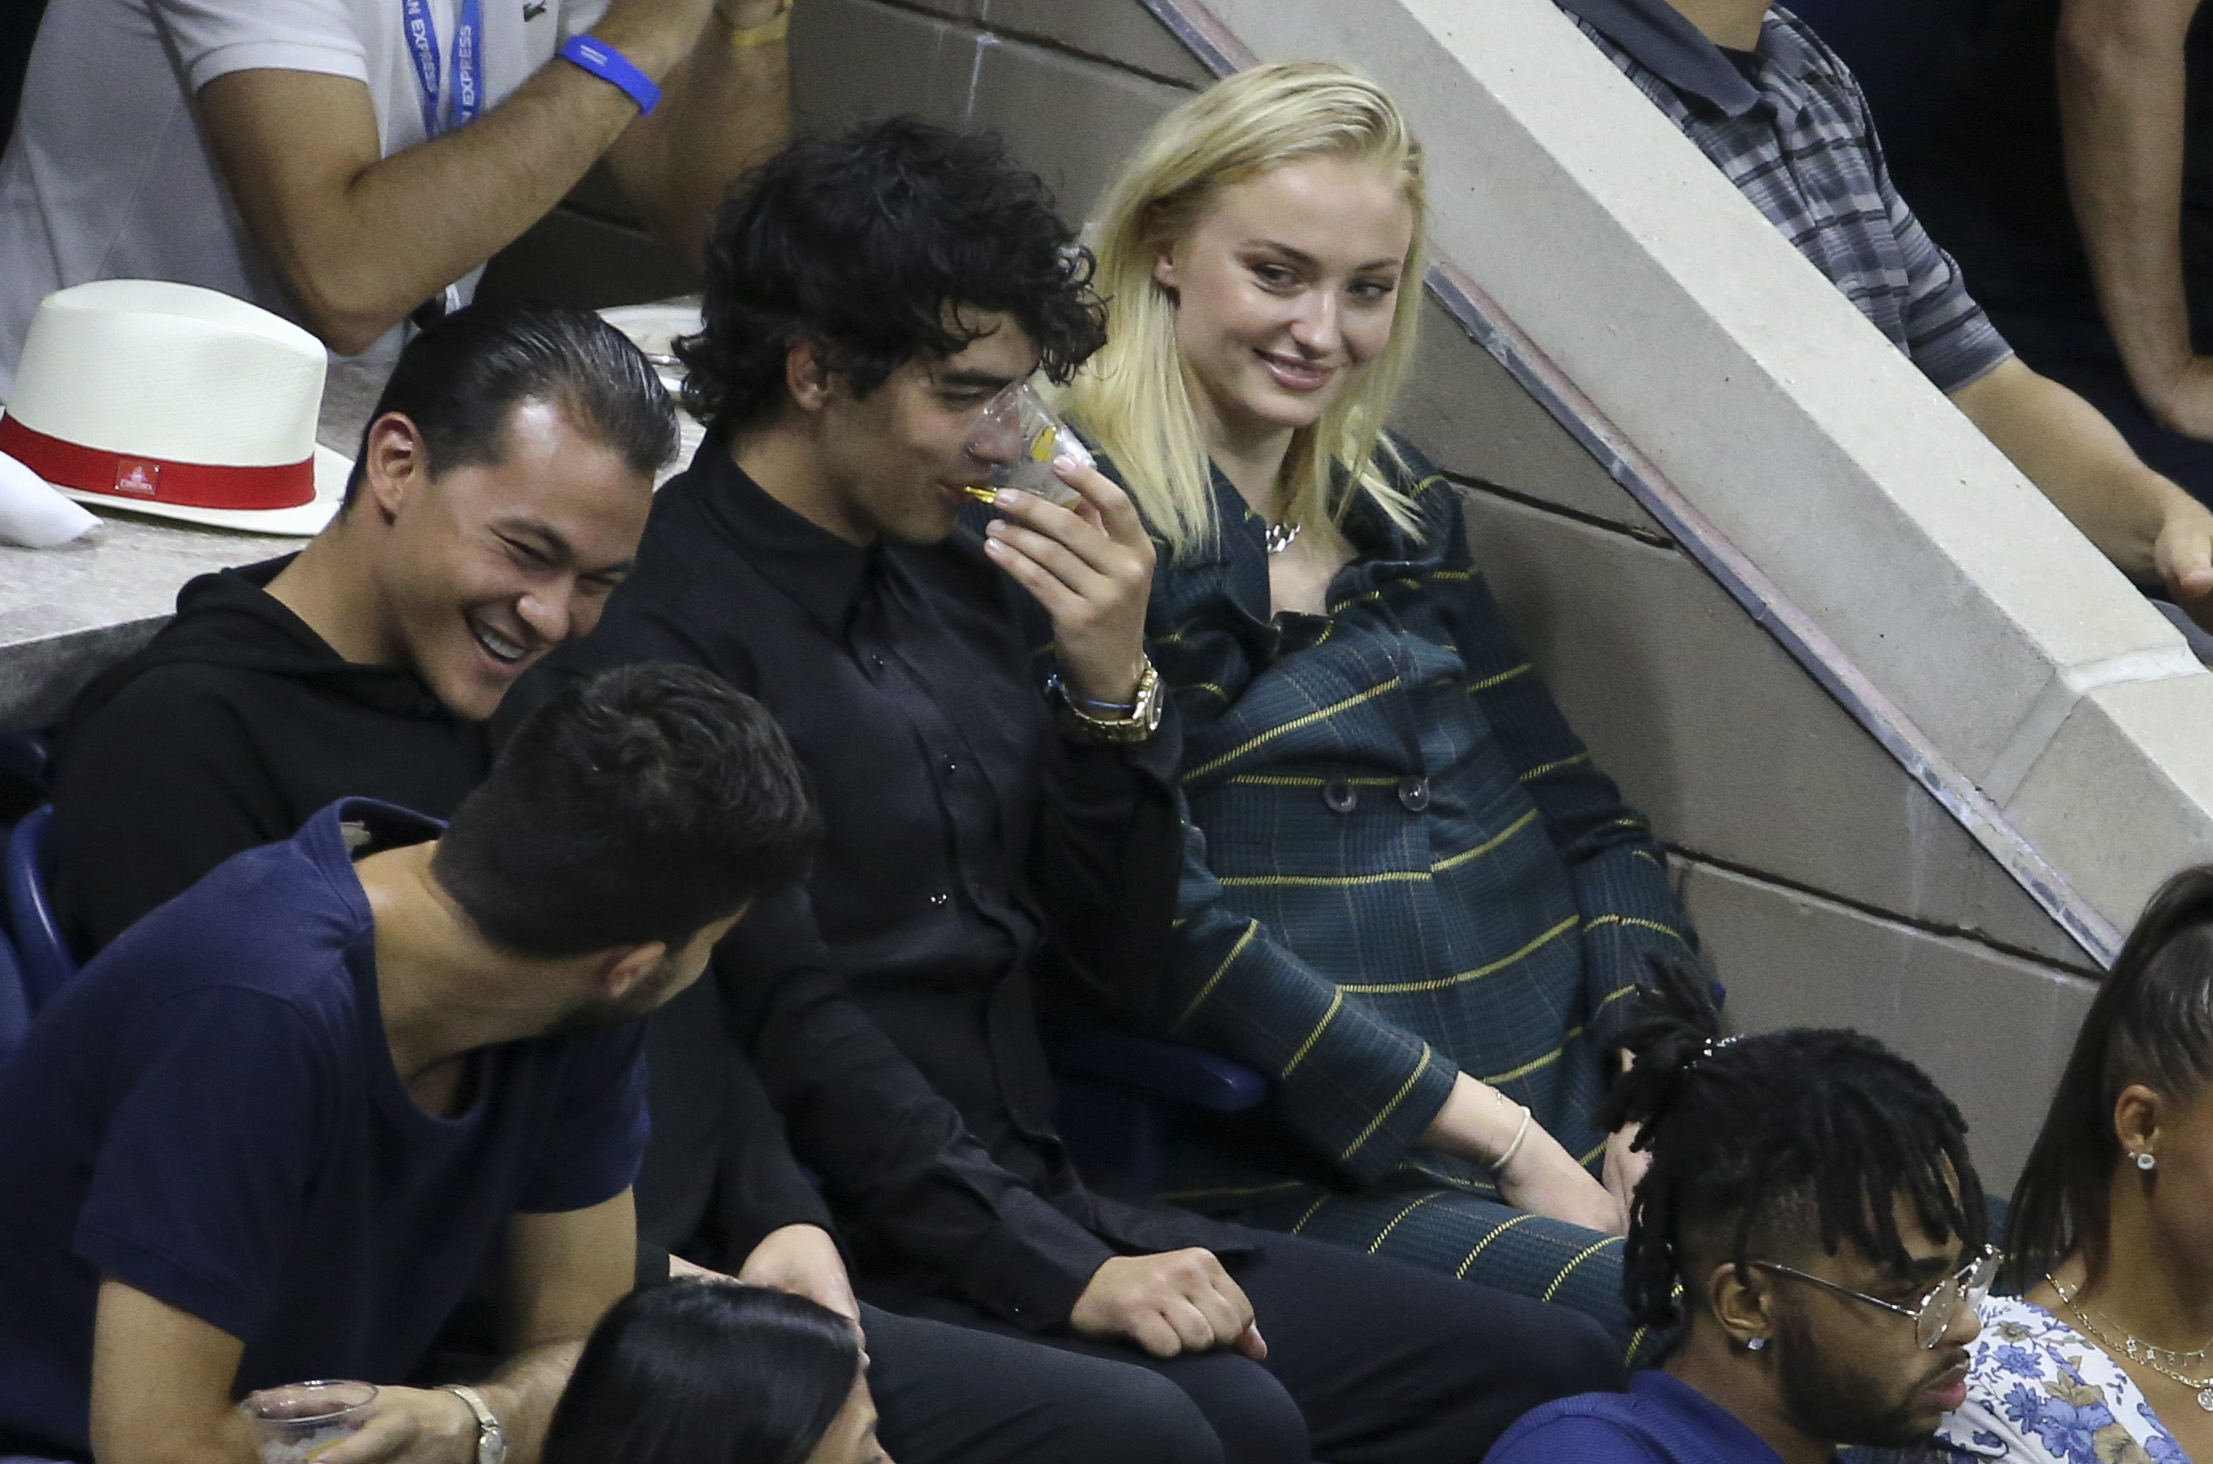 Joe Jonas and girlfriend Sophie Turner have a laugh at the US Open on Arthur Ashe stadium at the USTA Billie Jean King National Tennis Center on August 31, 2018 in Flushing Meadows, Queens, New York City. (Photo by Jean Catuffe/GC Images) (Jean Catuffe—GC Images)